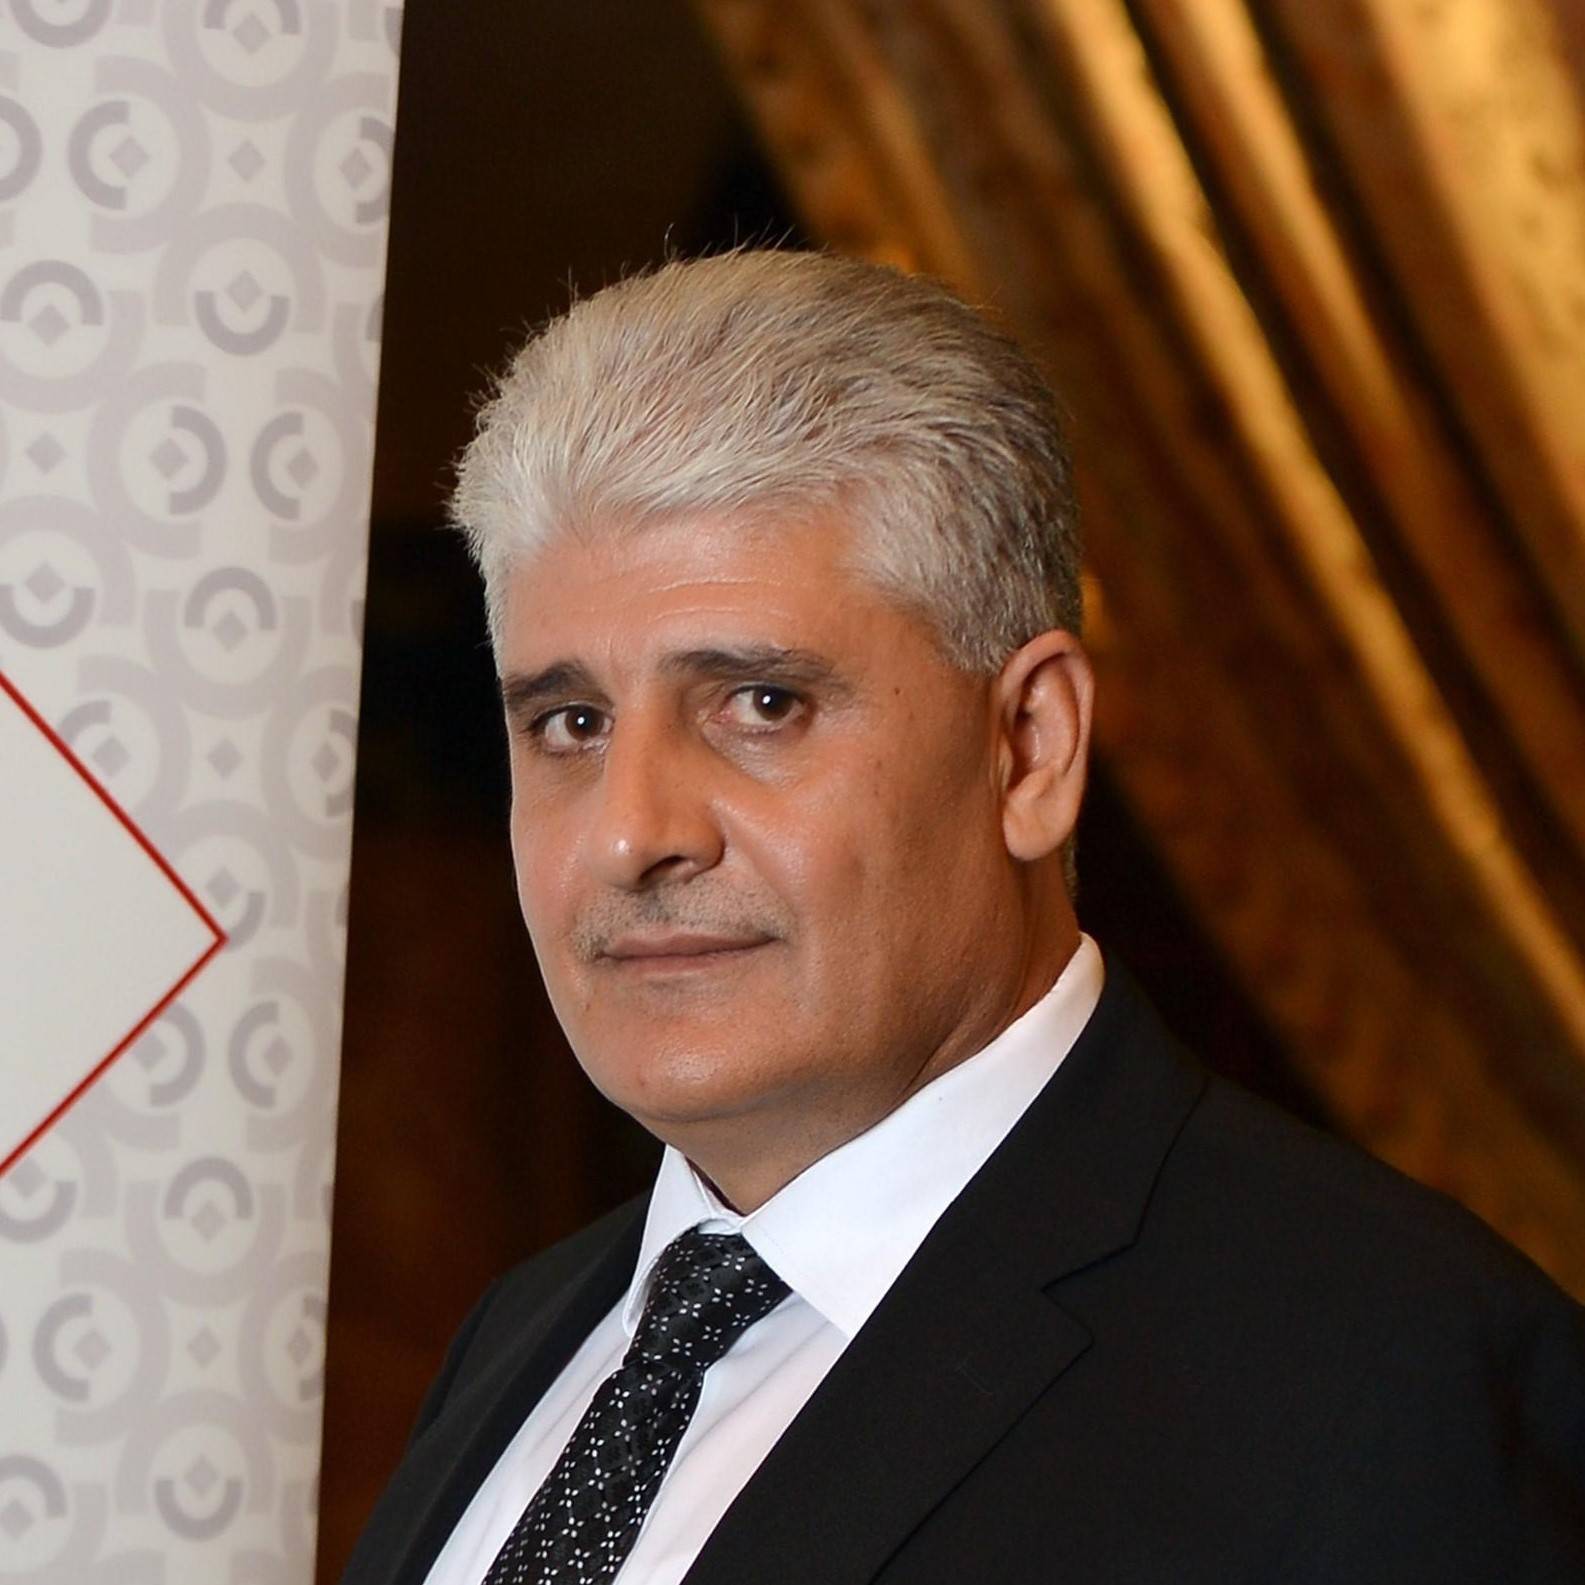 Dr. Ali Youssef, Director of the Commercial Bank of Syria